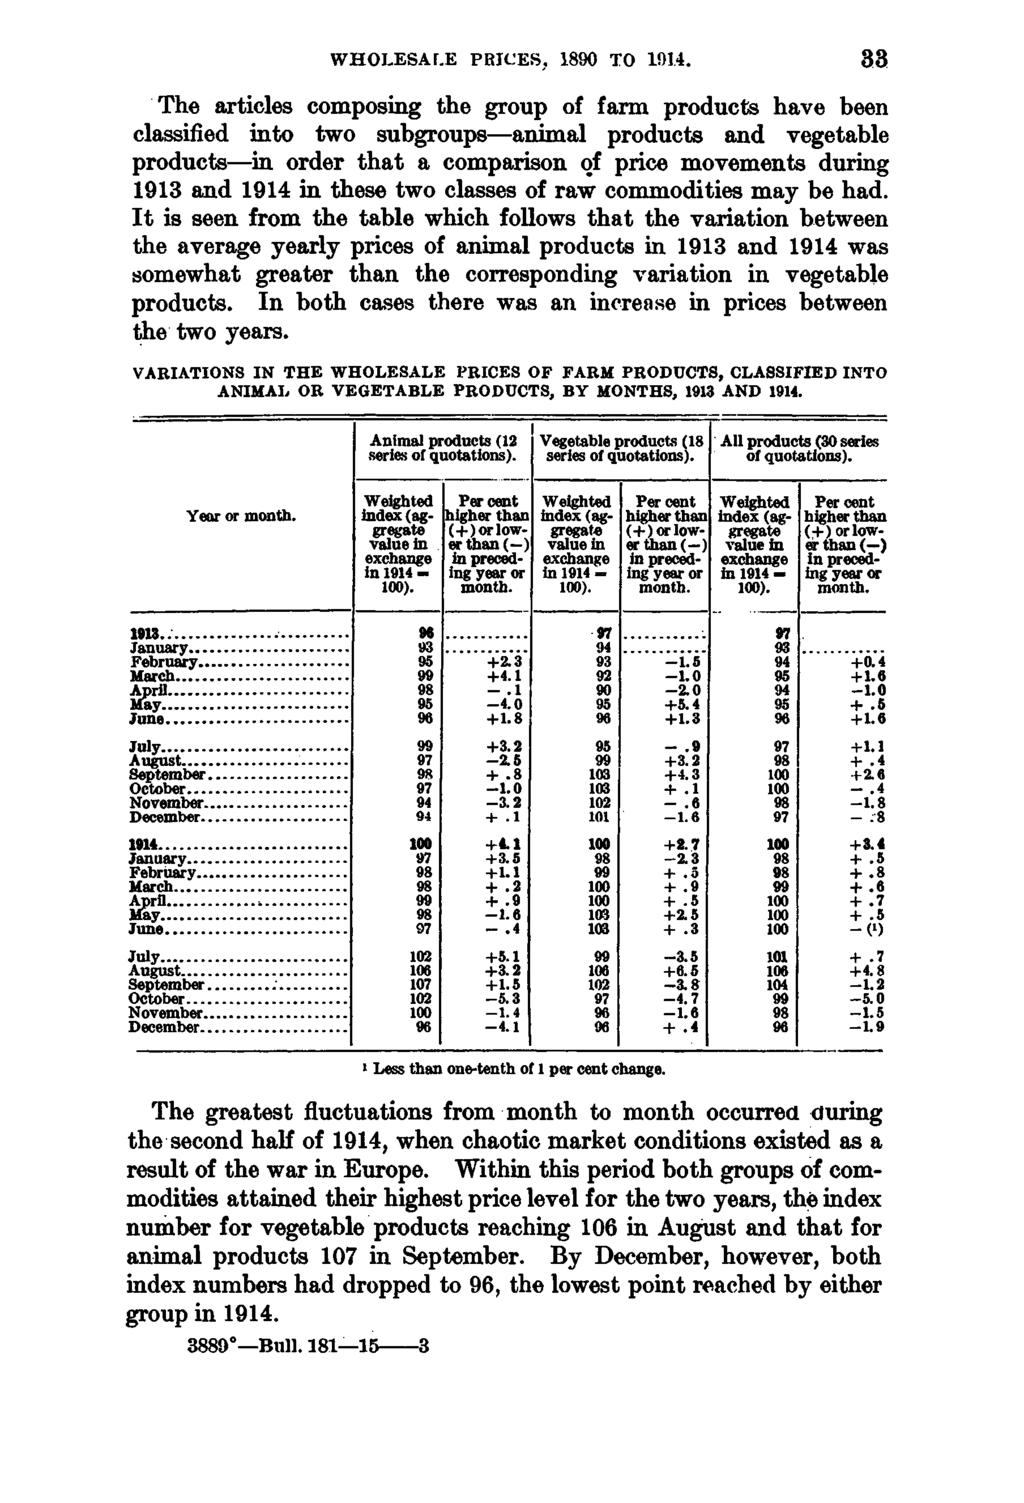 WHOLESALE PRICES, 1890 TO 33 The articles composing the group of farm products have been classified into two subgroups animal products and vegetable products in order that a comparison of movements